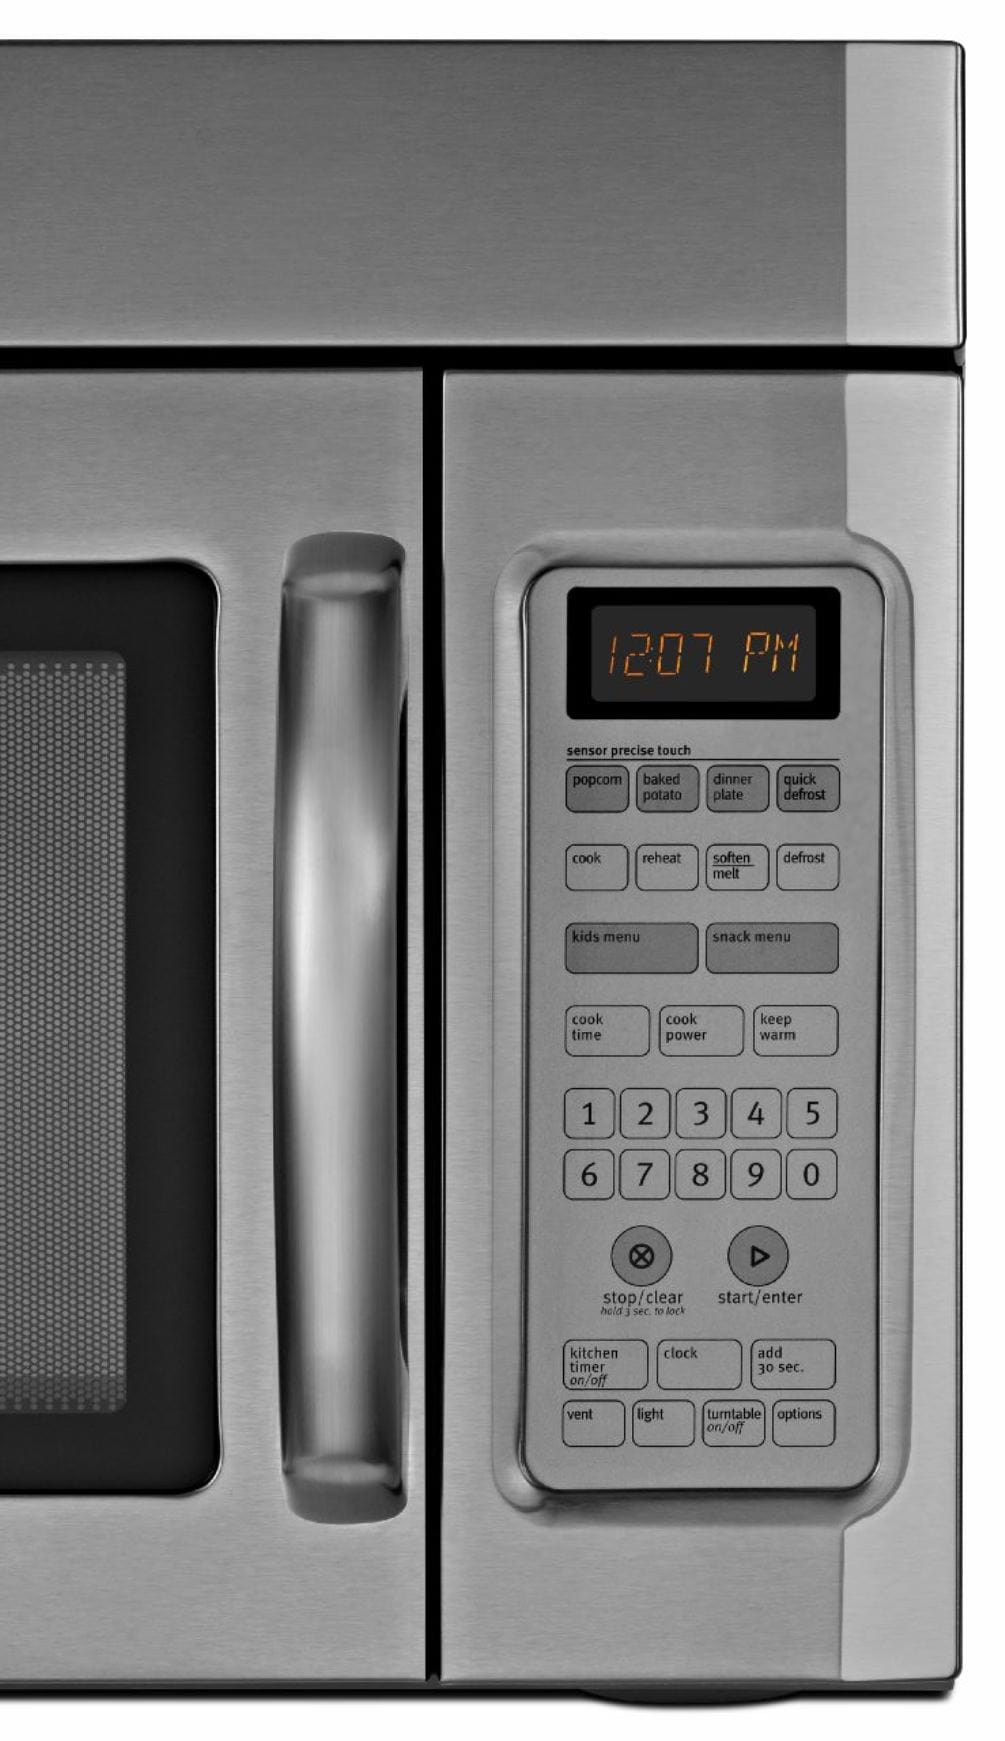 Maytag UMC5200BAS 2.0 Cu. Ft Countertop Radarange Microwave Oven with 1100  Watts of Power and 10 Power Levels: Stainless Steel